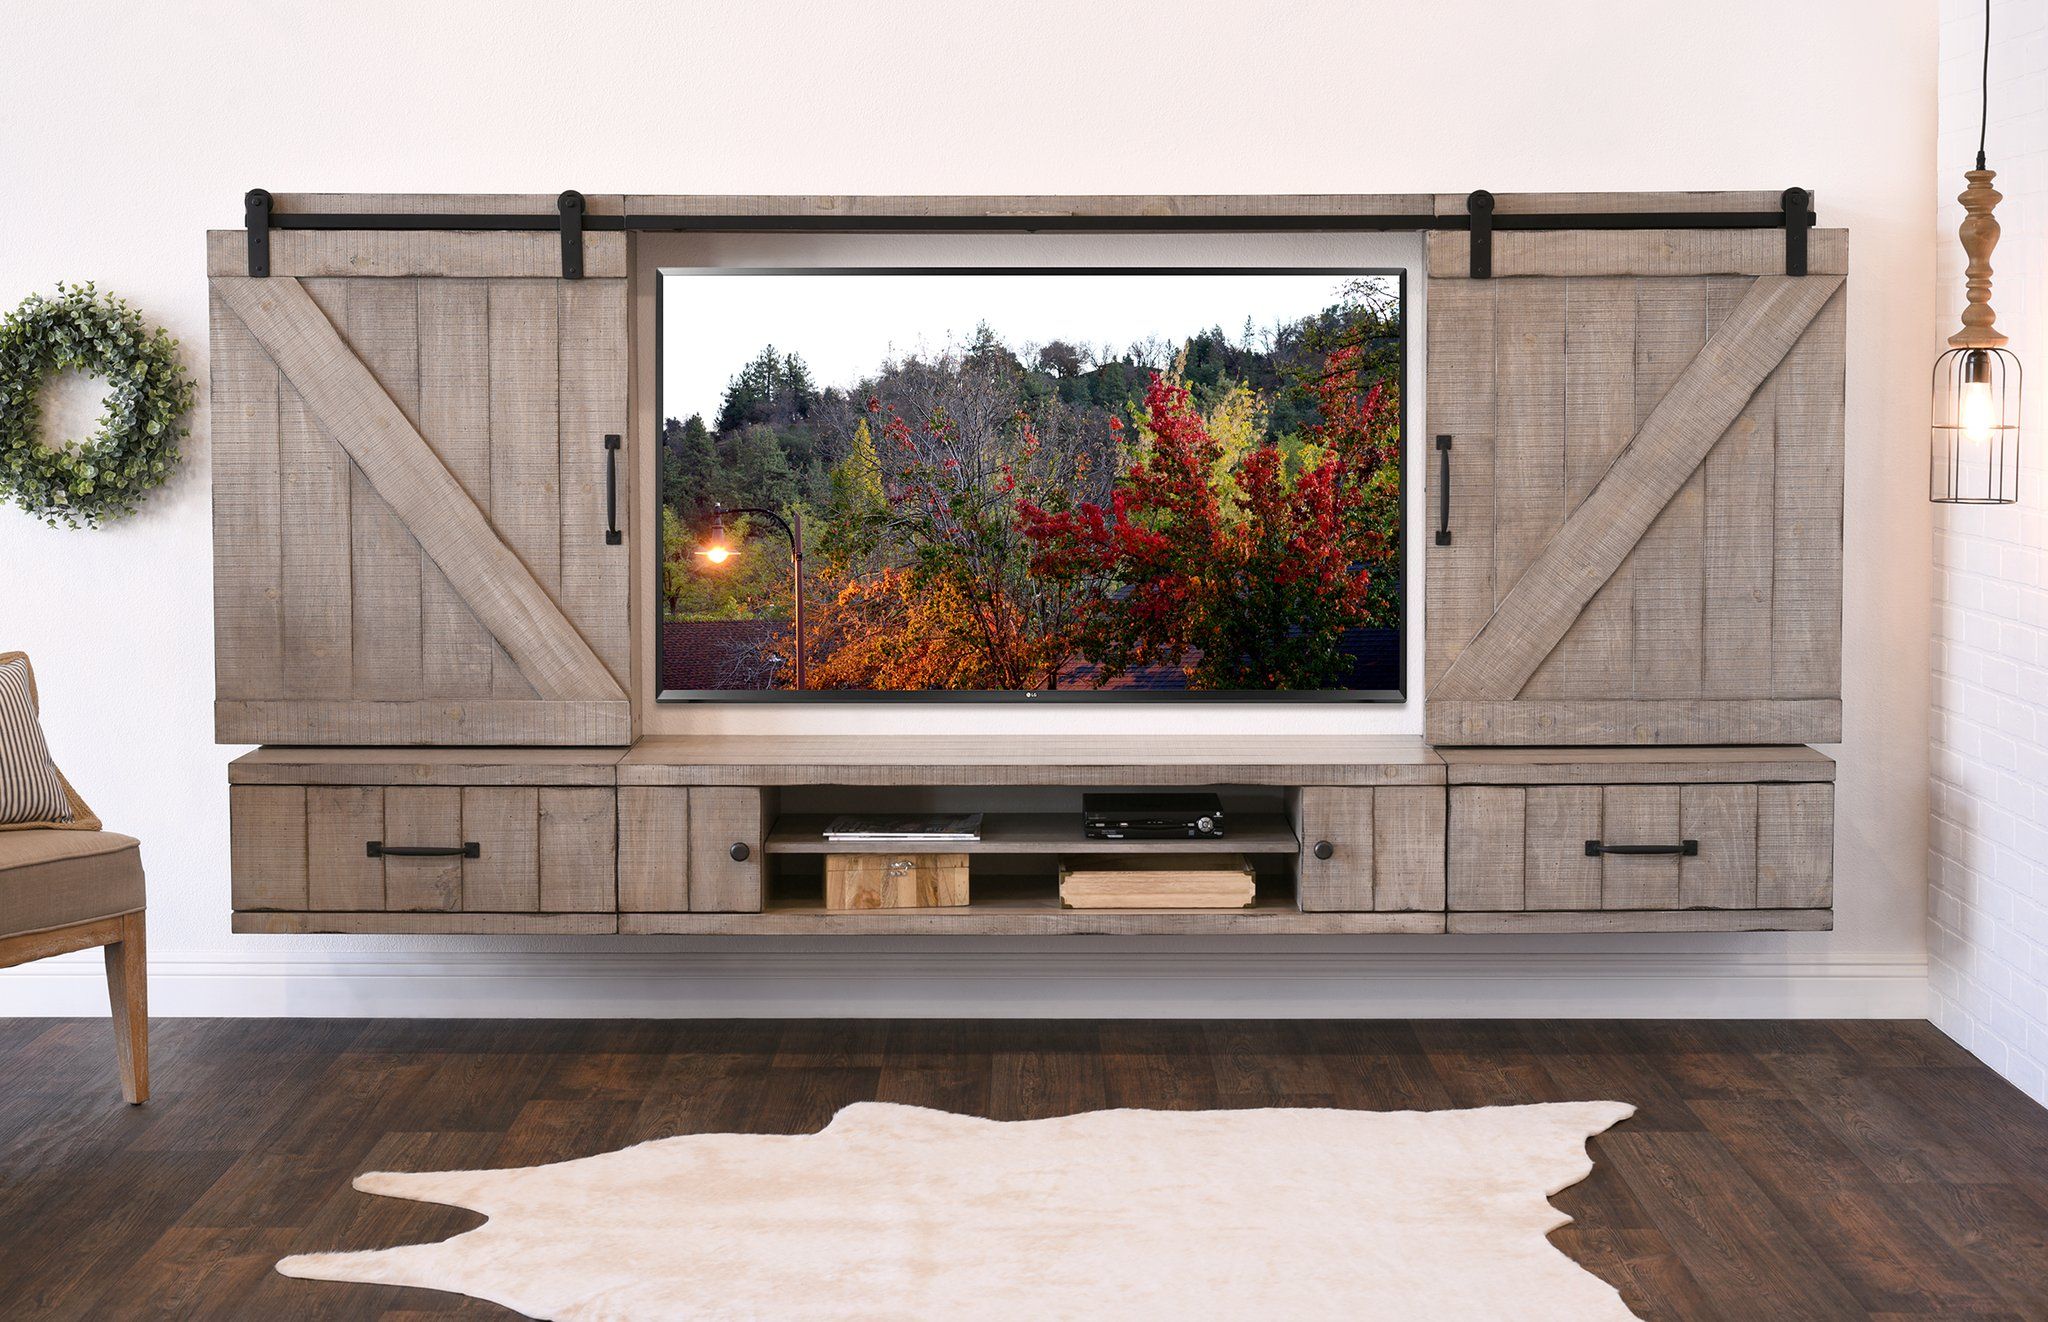 Sliding Barn Door Tv Stand with Fireplace Inspirational Barn Door Floating Tv Stand Entertainment Center Farmhouse